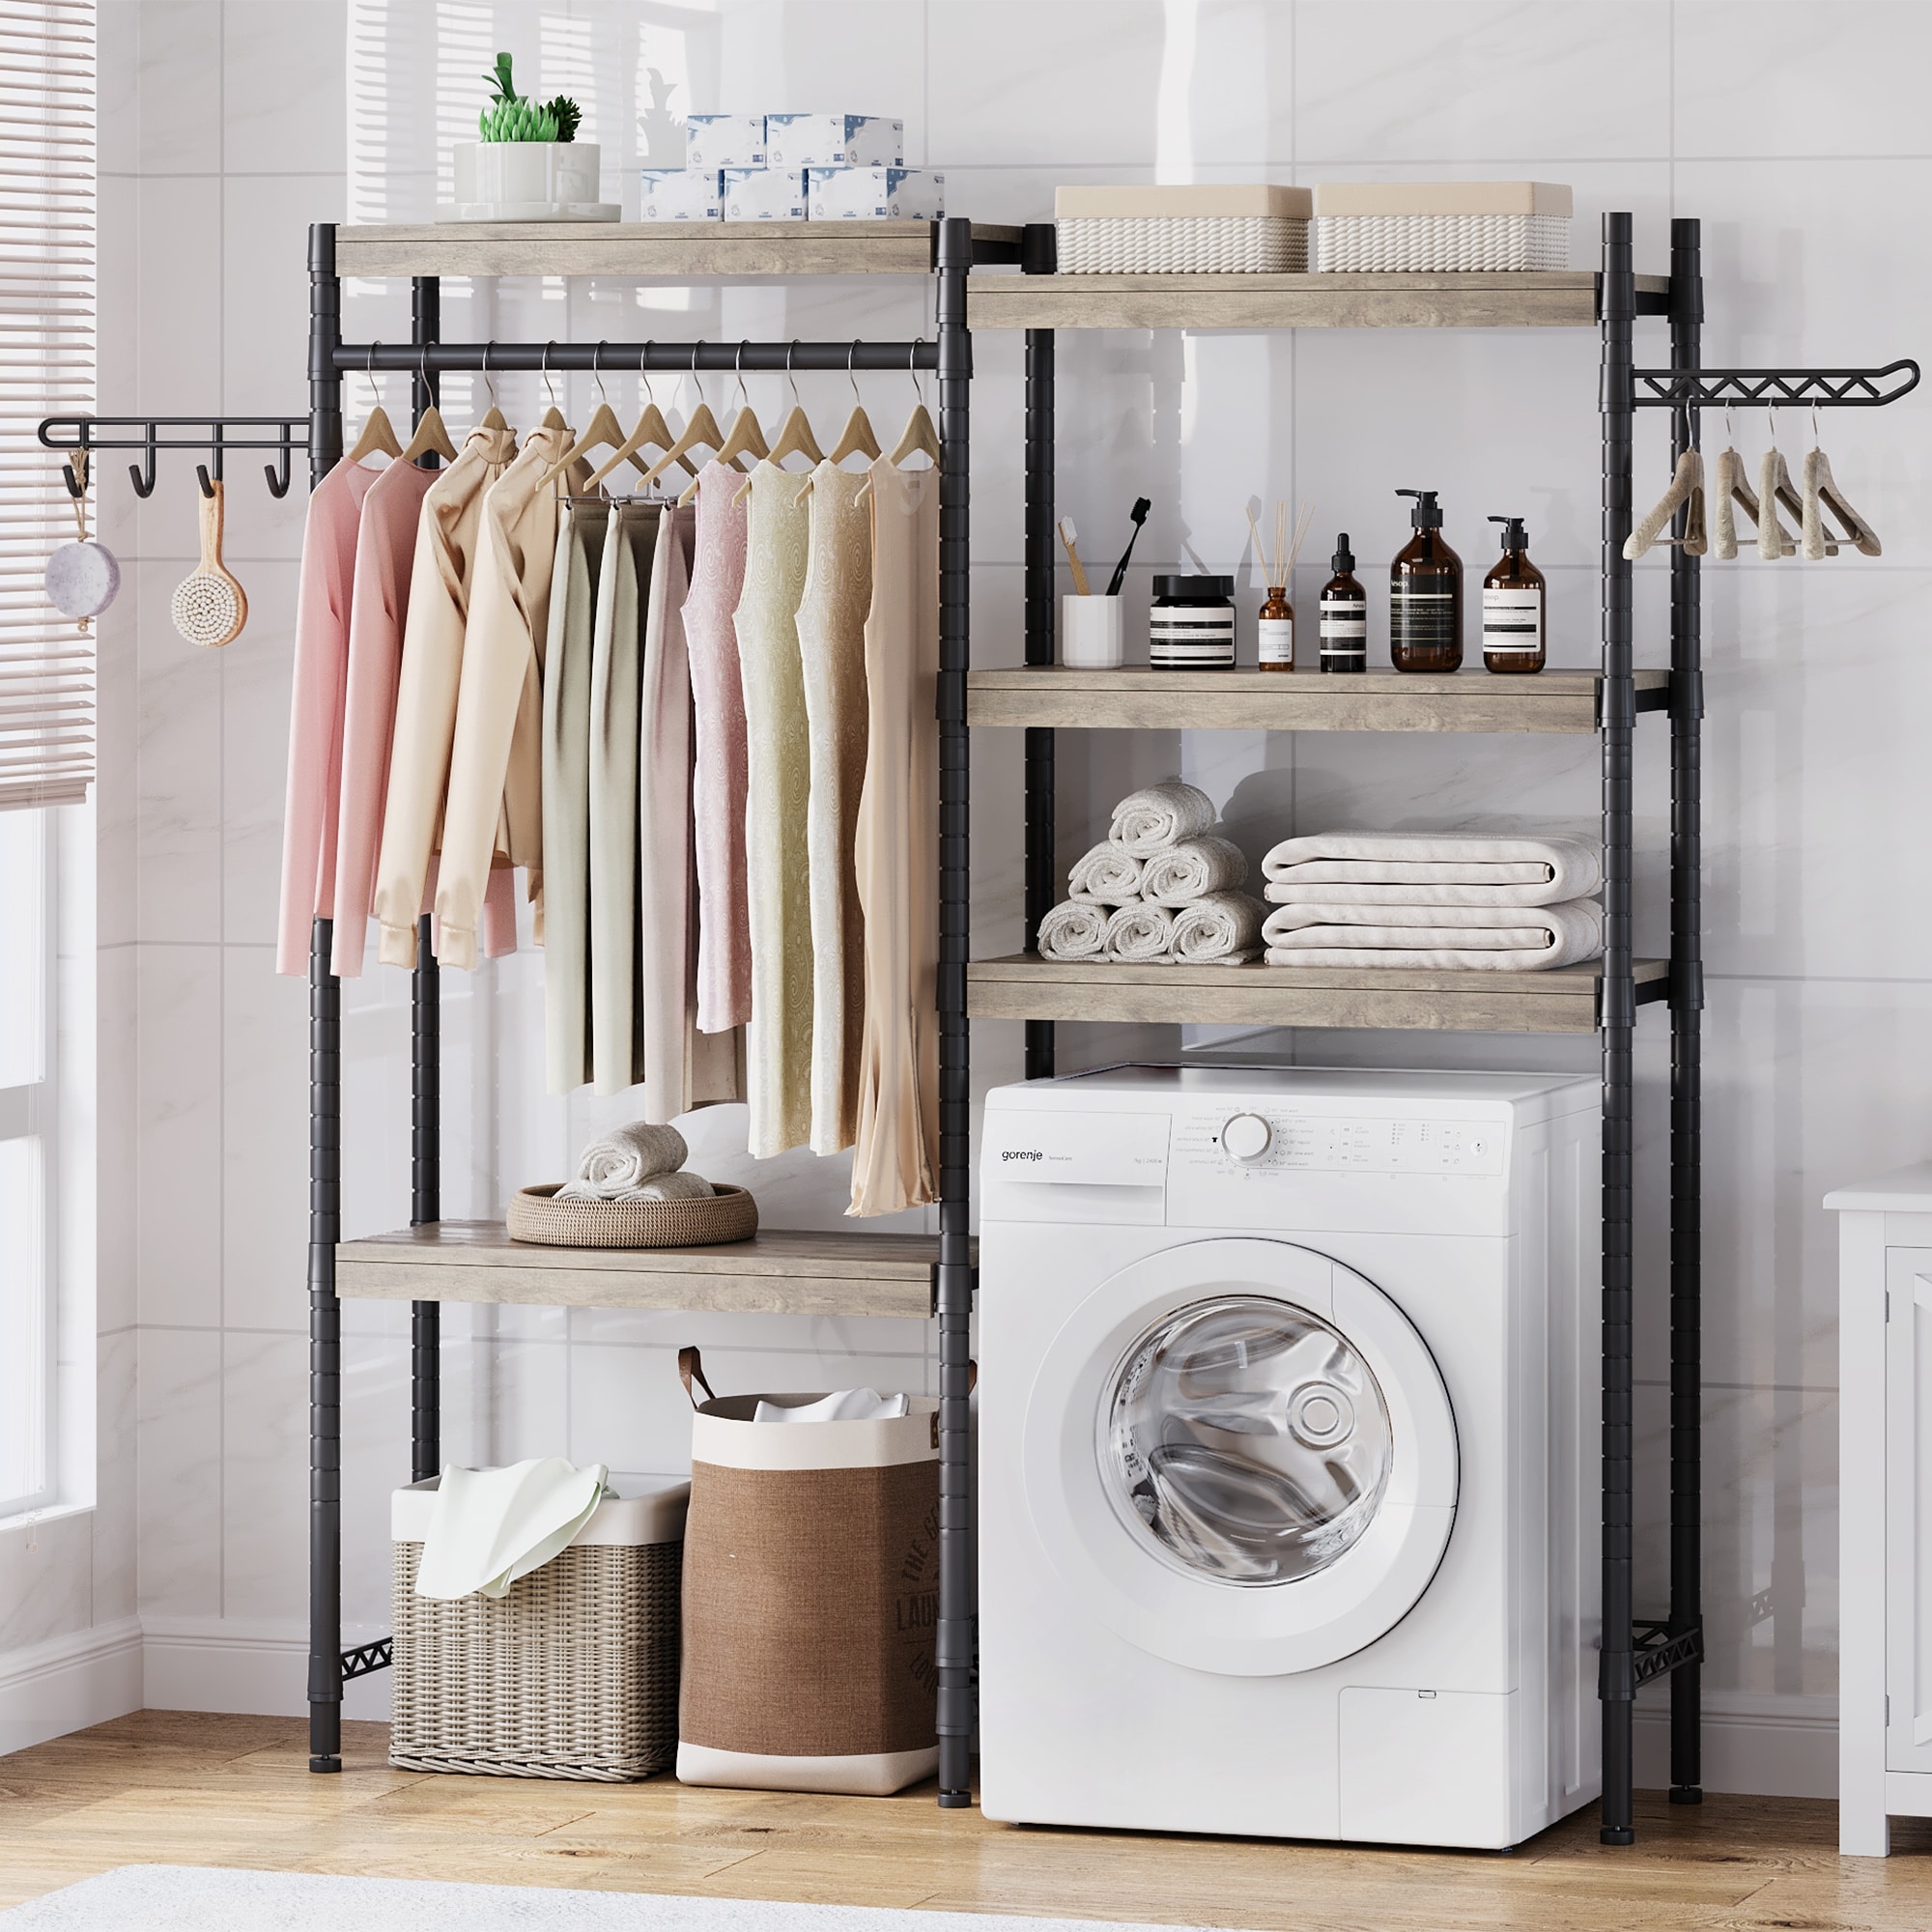 https://ak1.ostkcdn.com/images/products/is/images/direct/fbb4d46451b4a947586fe33727740bb1f70c5be3/5-Tier-Wood-Over-The-Washer-and-Dryer-Storage-Shelf-for-Laundry-Room.jpg